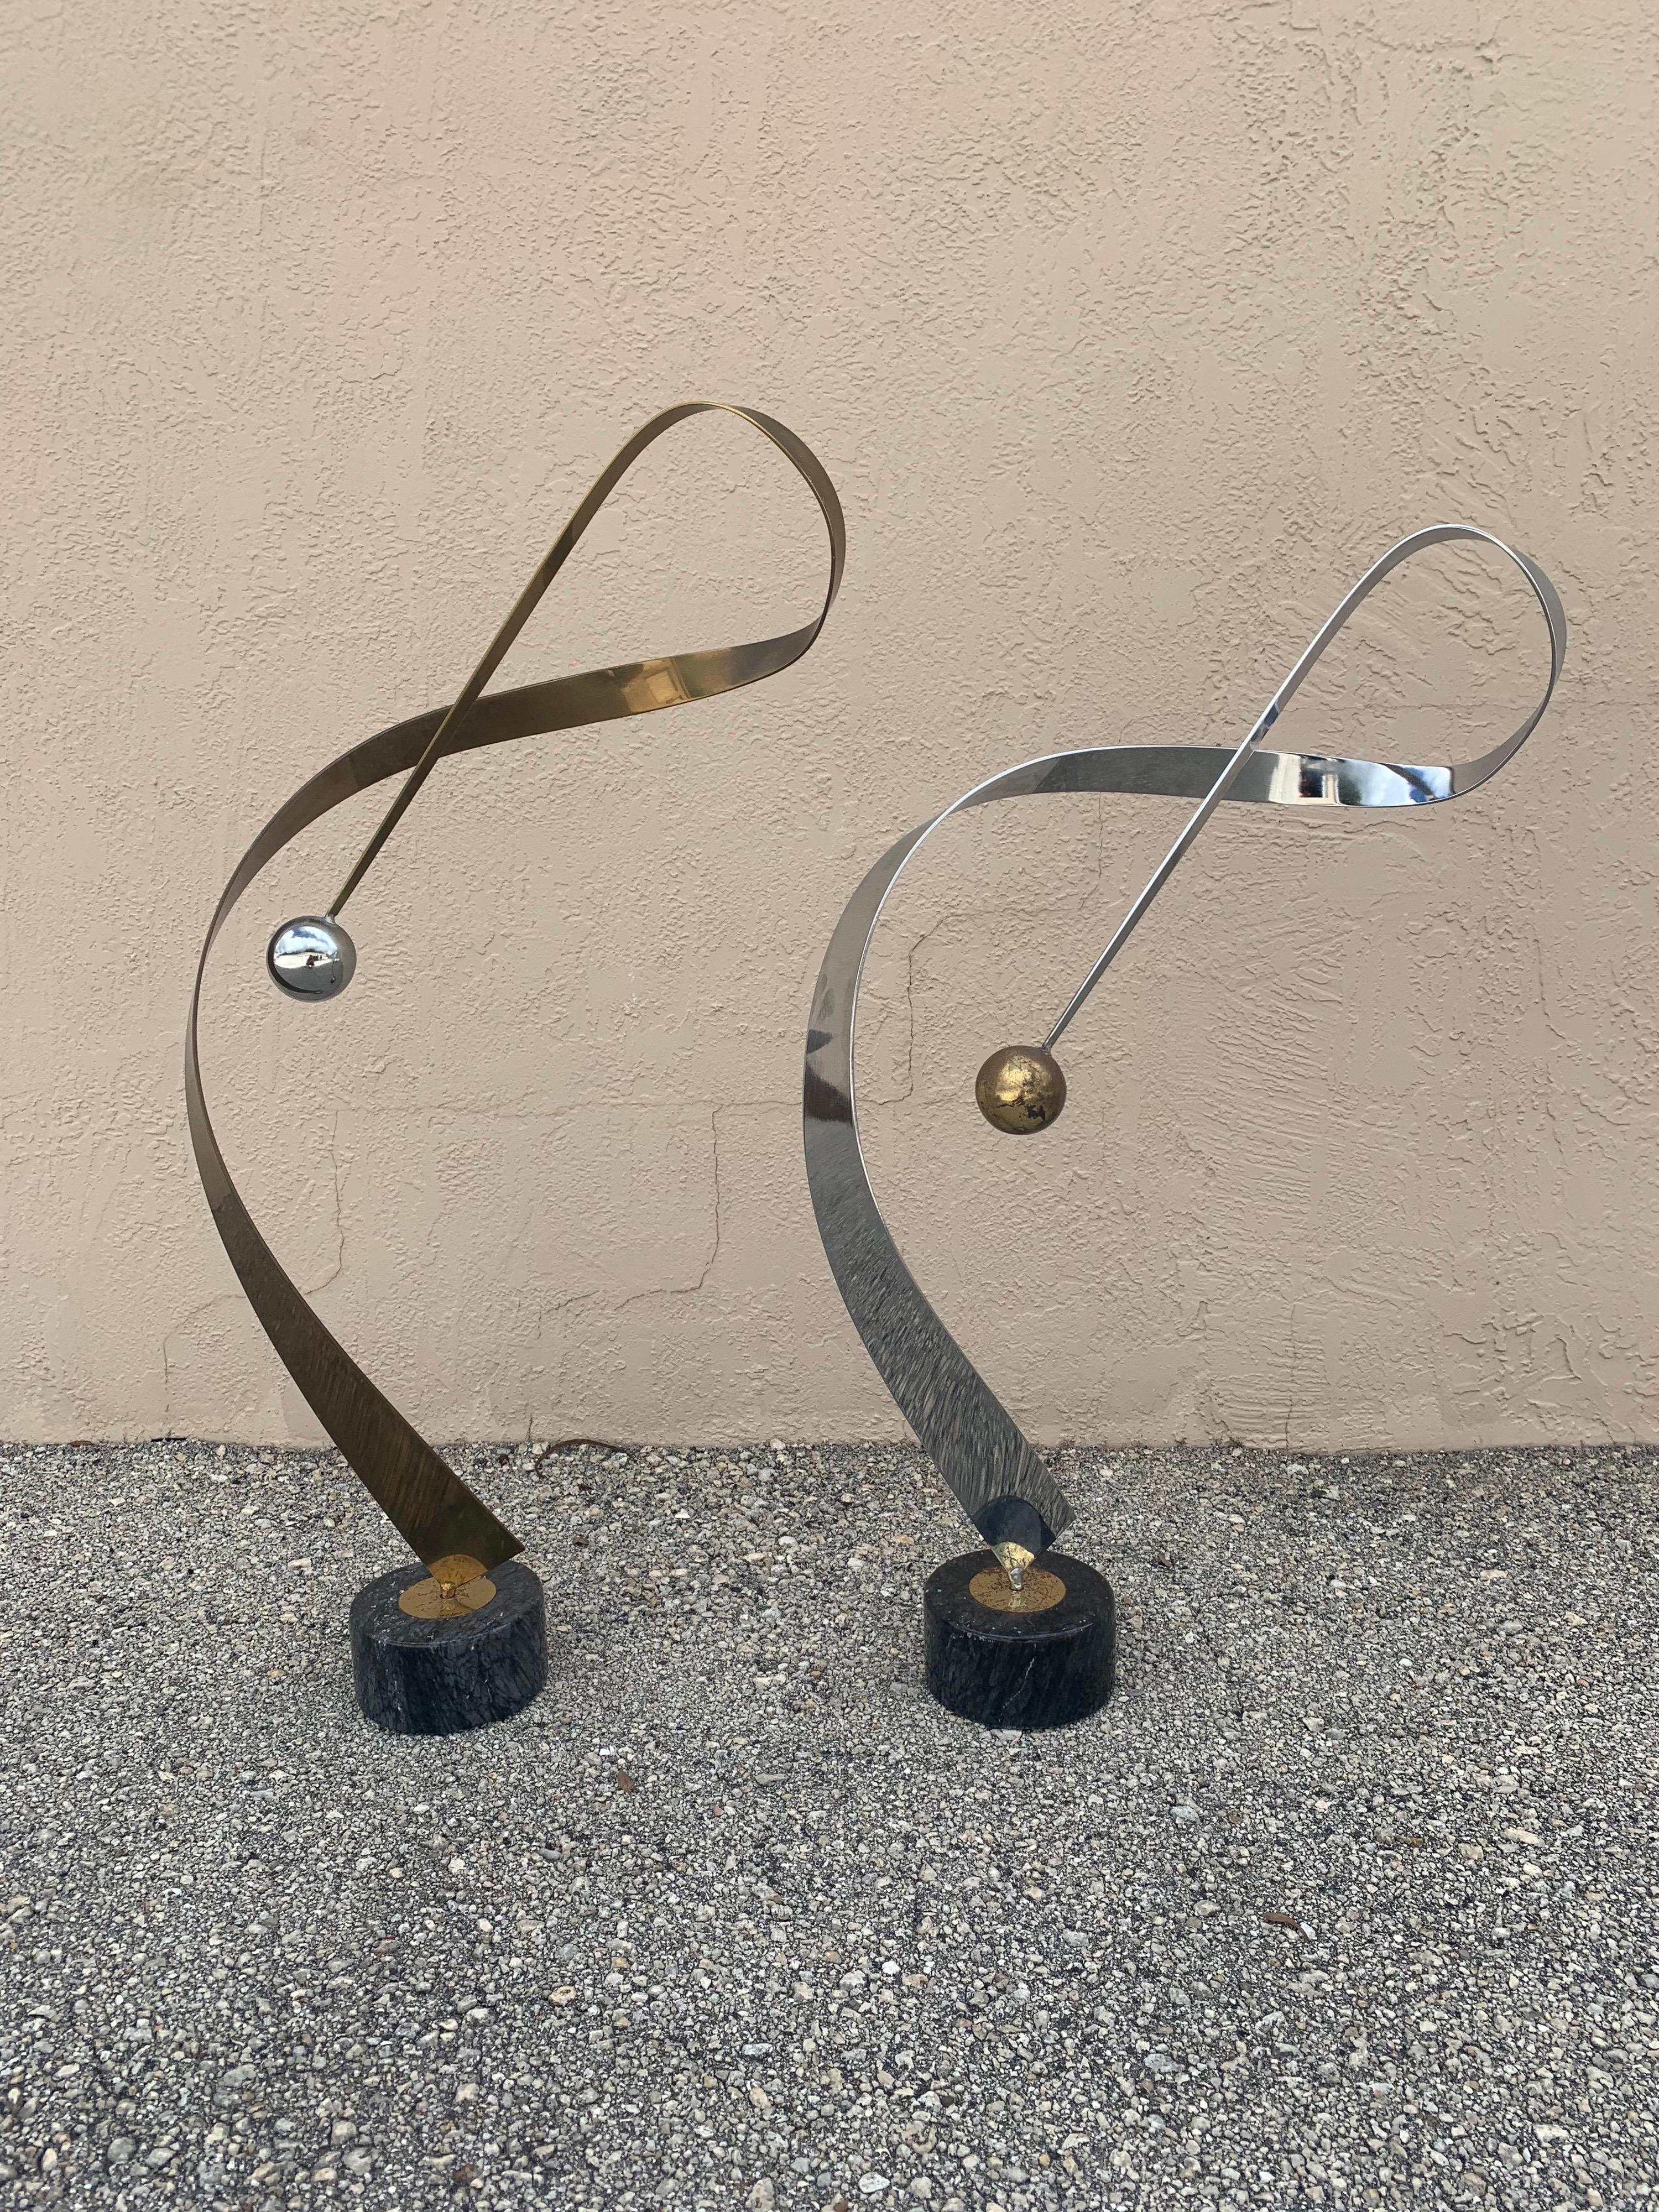 Stunning pair of mirrored Ribbon sculptures by C Jere. One sculpture is a brass ribbon with a chrome ball and the other a chrome ribbon with a brass ball. Both sitting on a black marble base. Beautiful and striking curves that change simply by